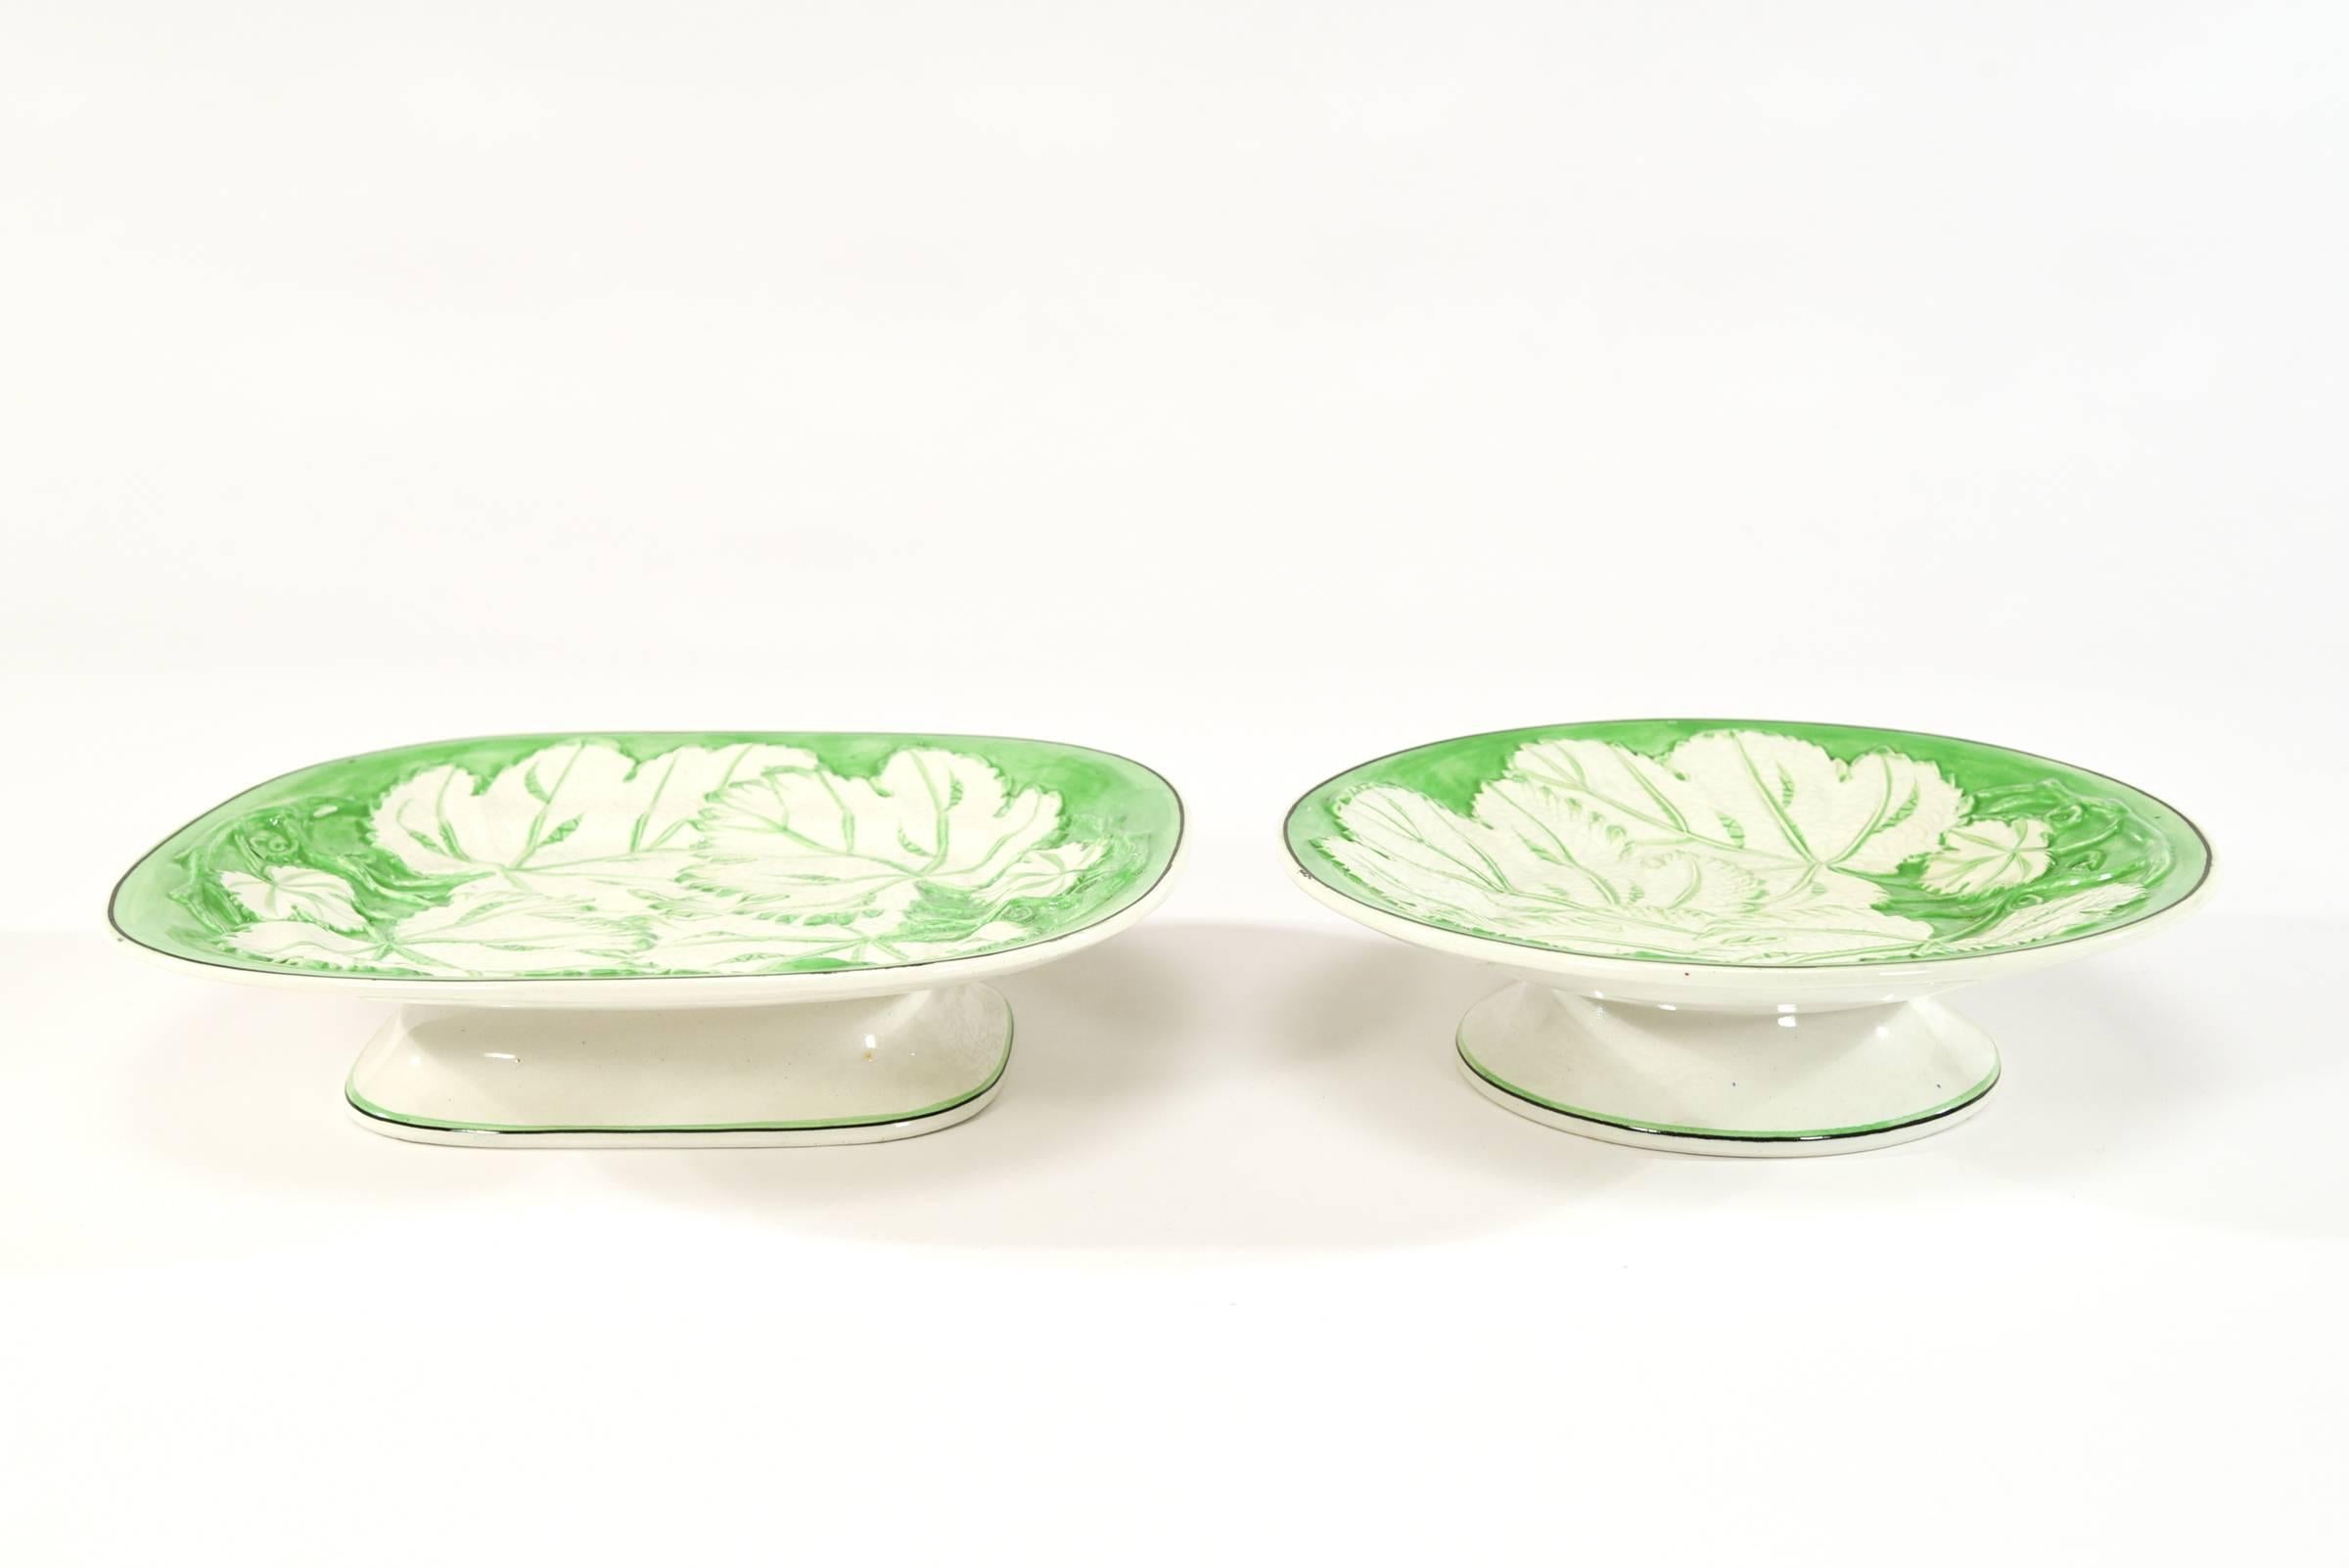 English Pearlware Dessert Service with Molded Grape Leaves in Relief 12 Plates/2 Tazzas